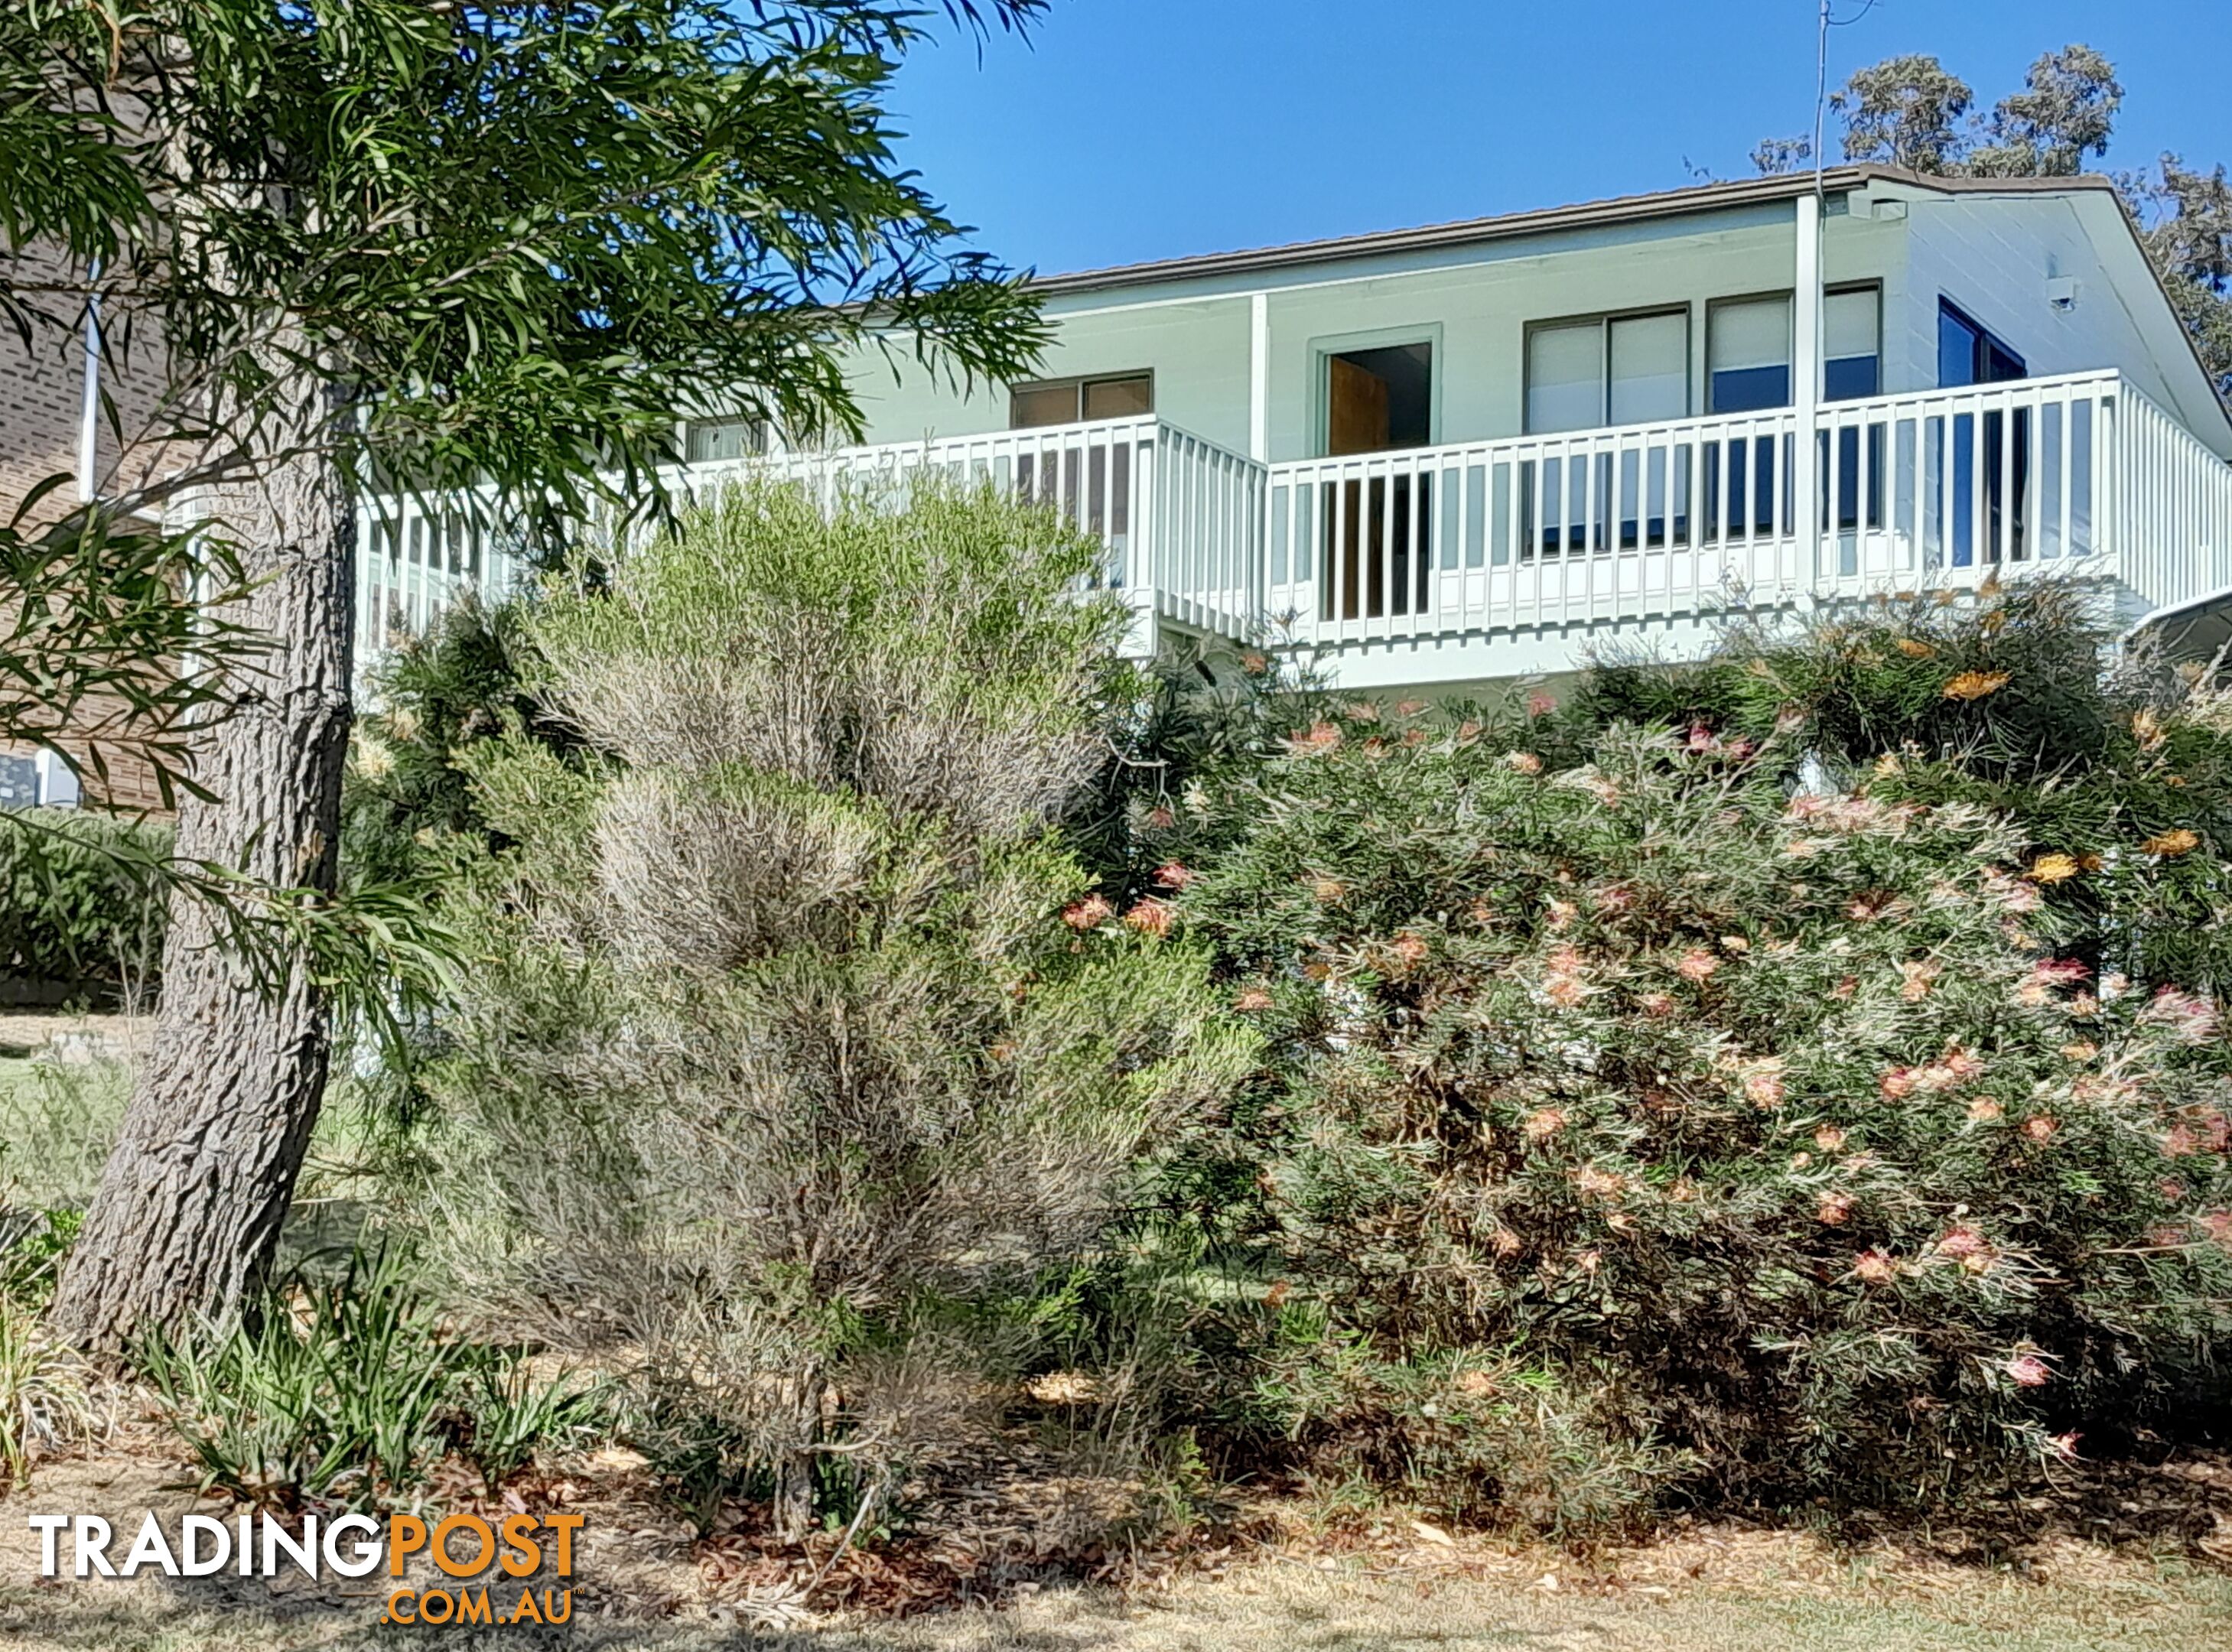 Comfortable Home with Lake and Ocean Views  $670,000 Tuross Head